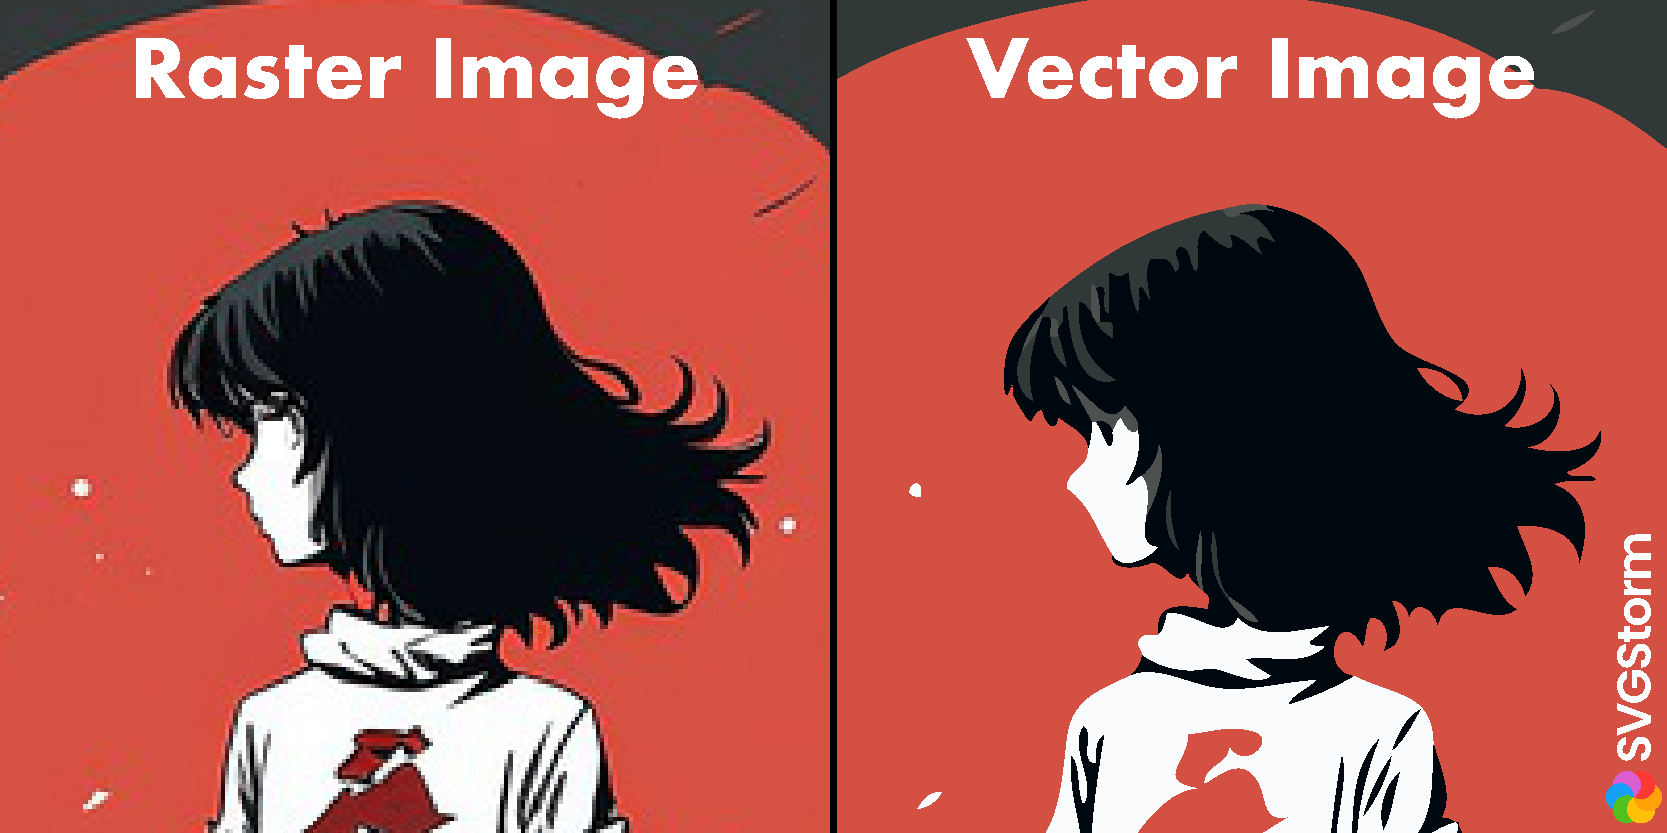 How to vectorize raster images for free online?